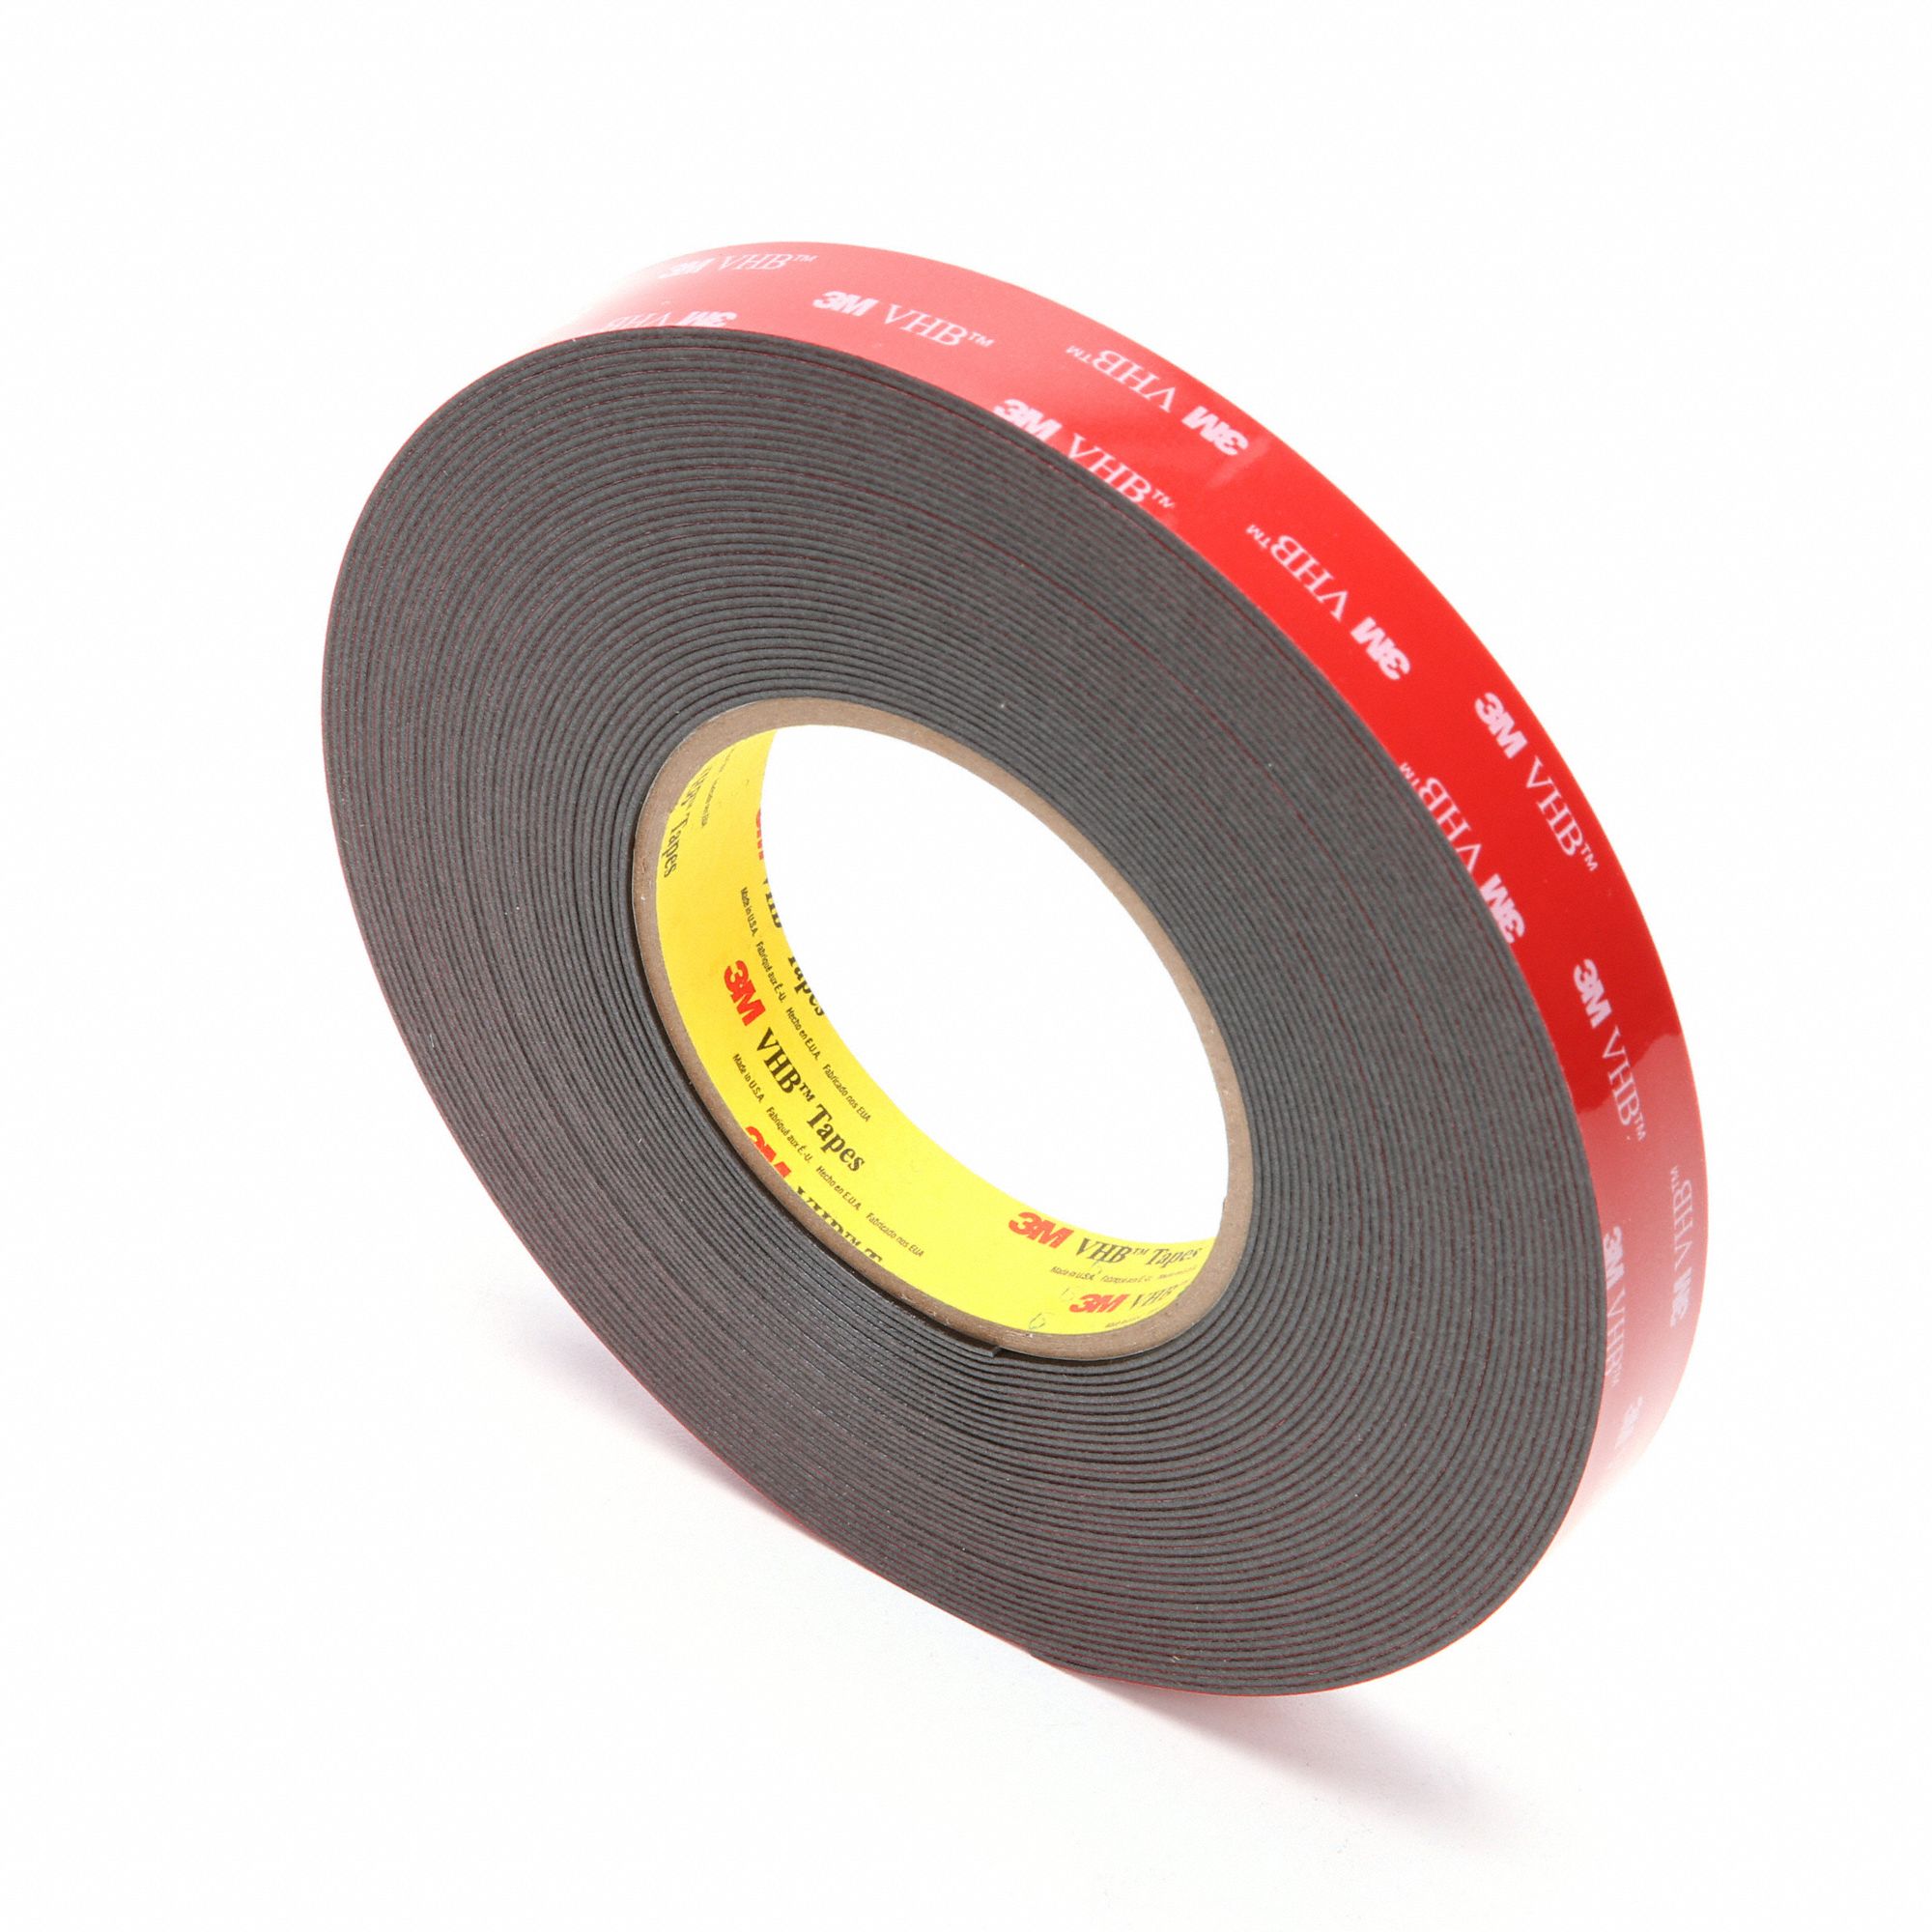 3M Double Sided VHB Tape,3/4 inch,15 yd. 5952, Black